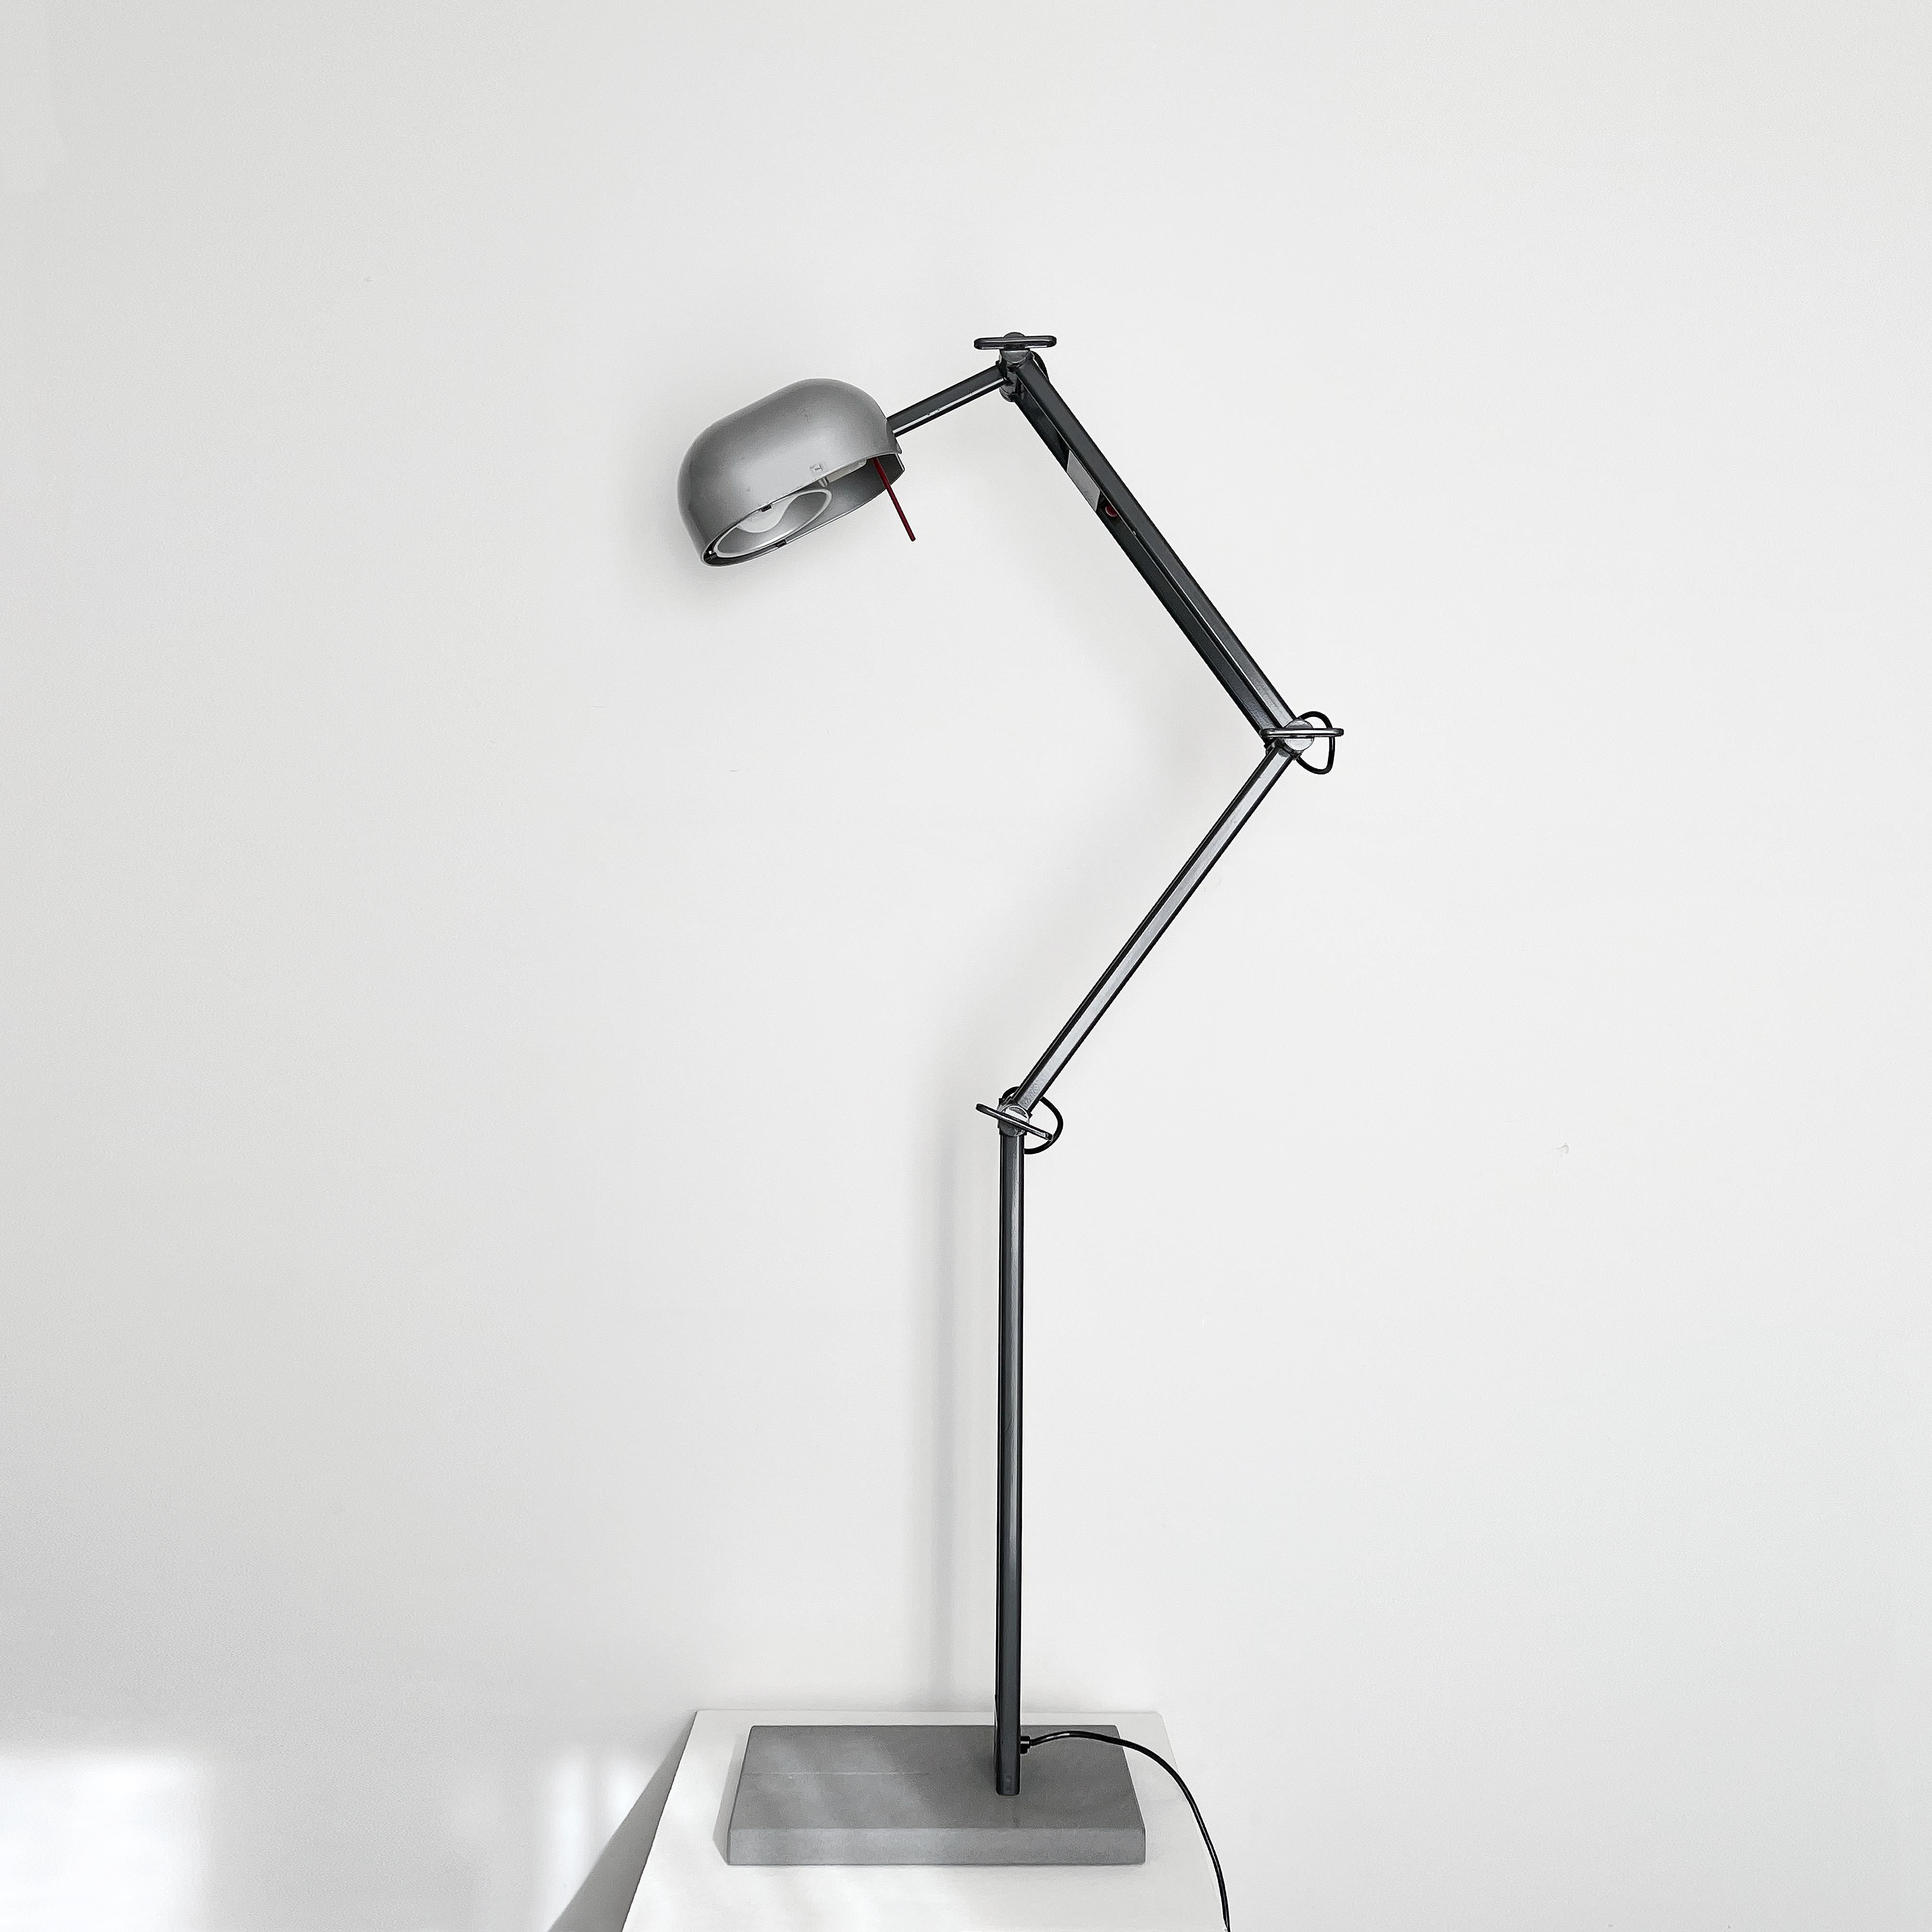 Italian-made Vintage Artemide Adone Floor Lamp from the 1980s with a Modern metal design and stone base.